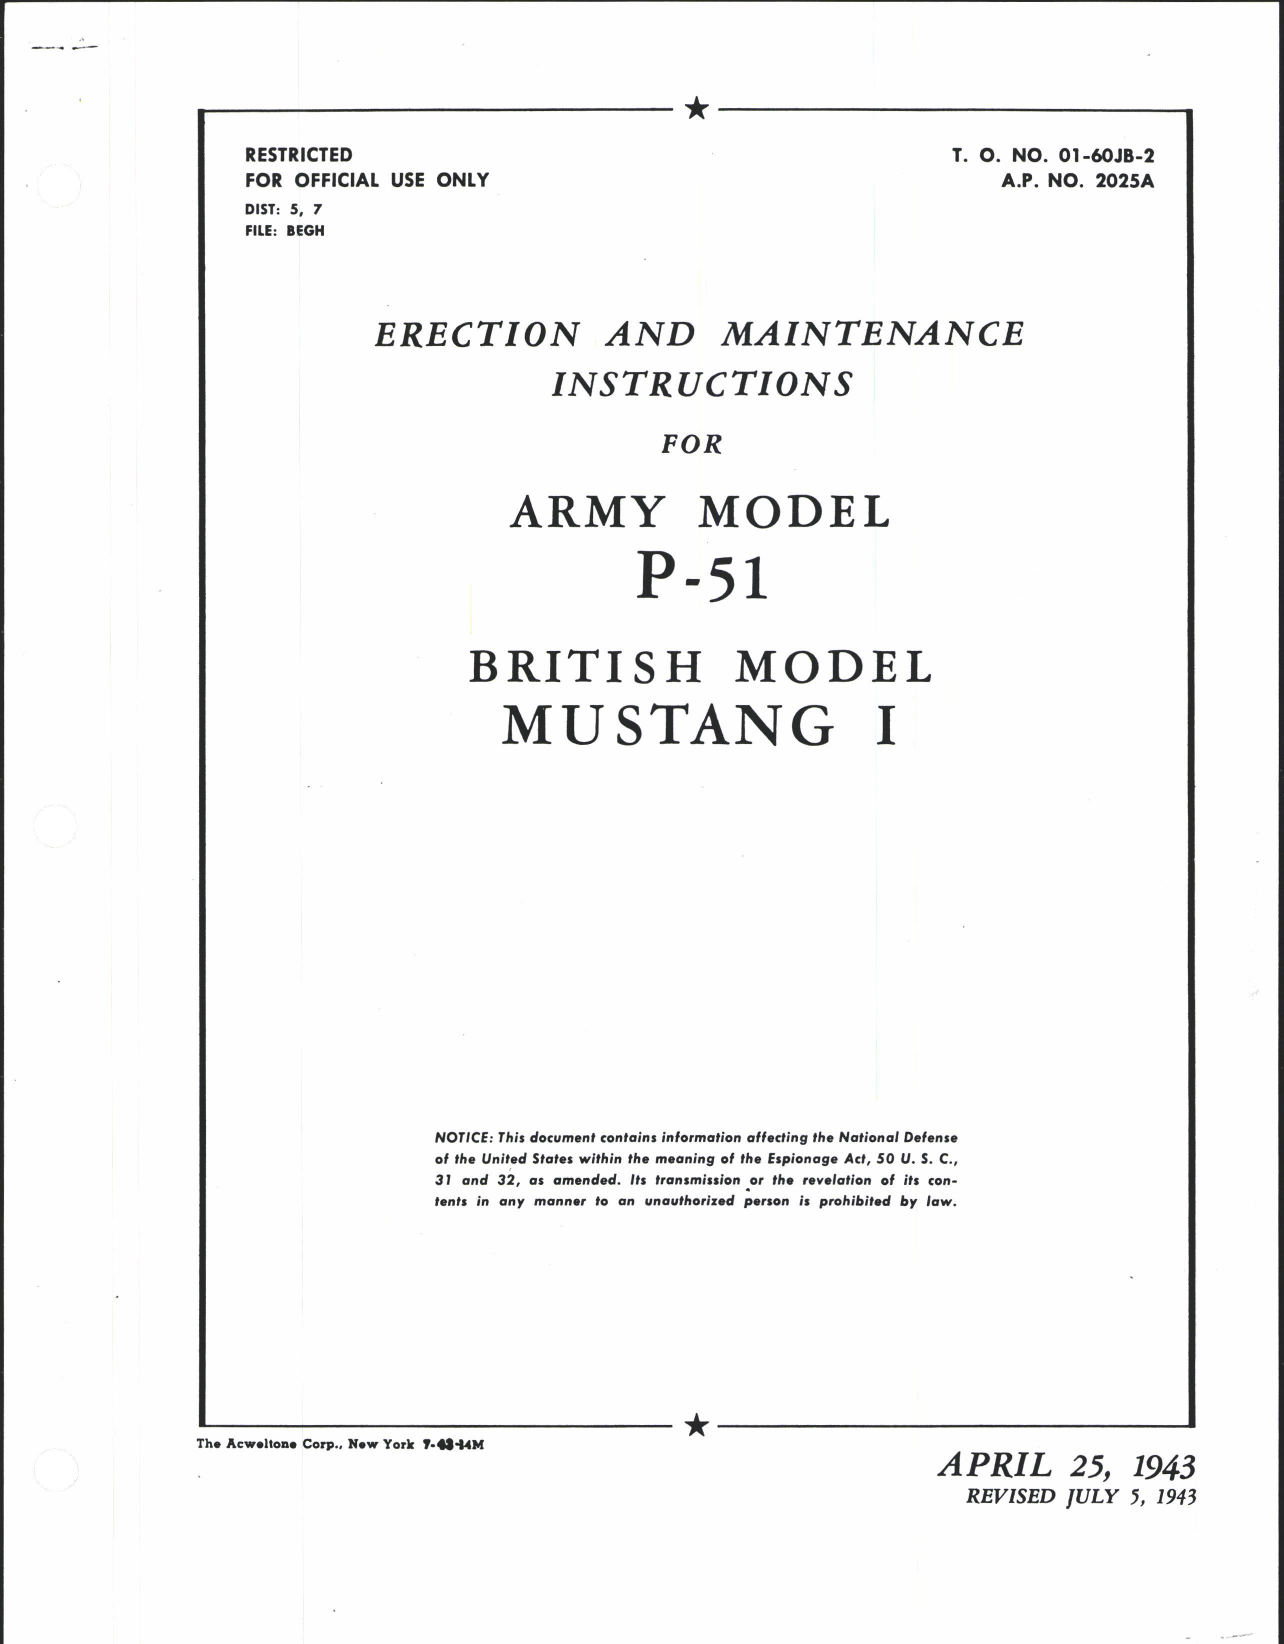 Sample page 1 from AirCorps Library document: Erection & Maintenance Instructions for P-51